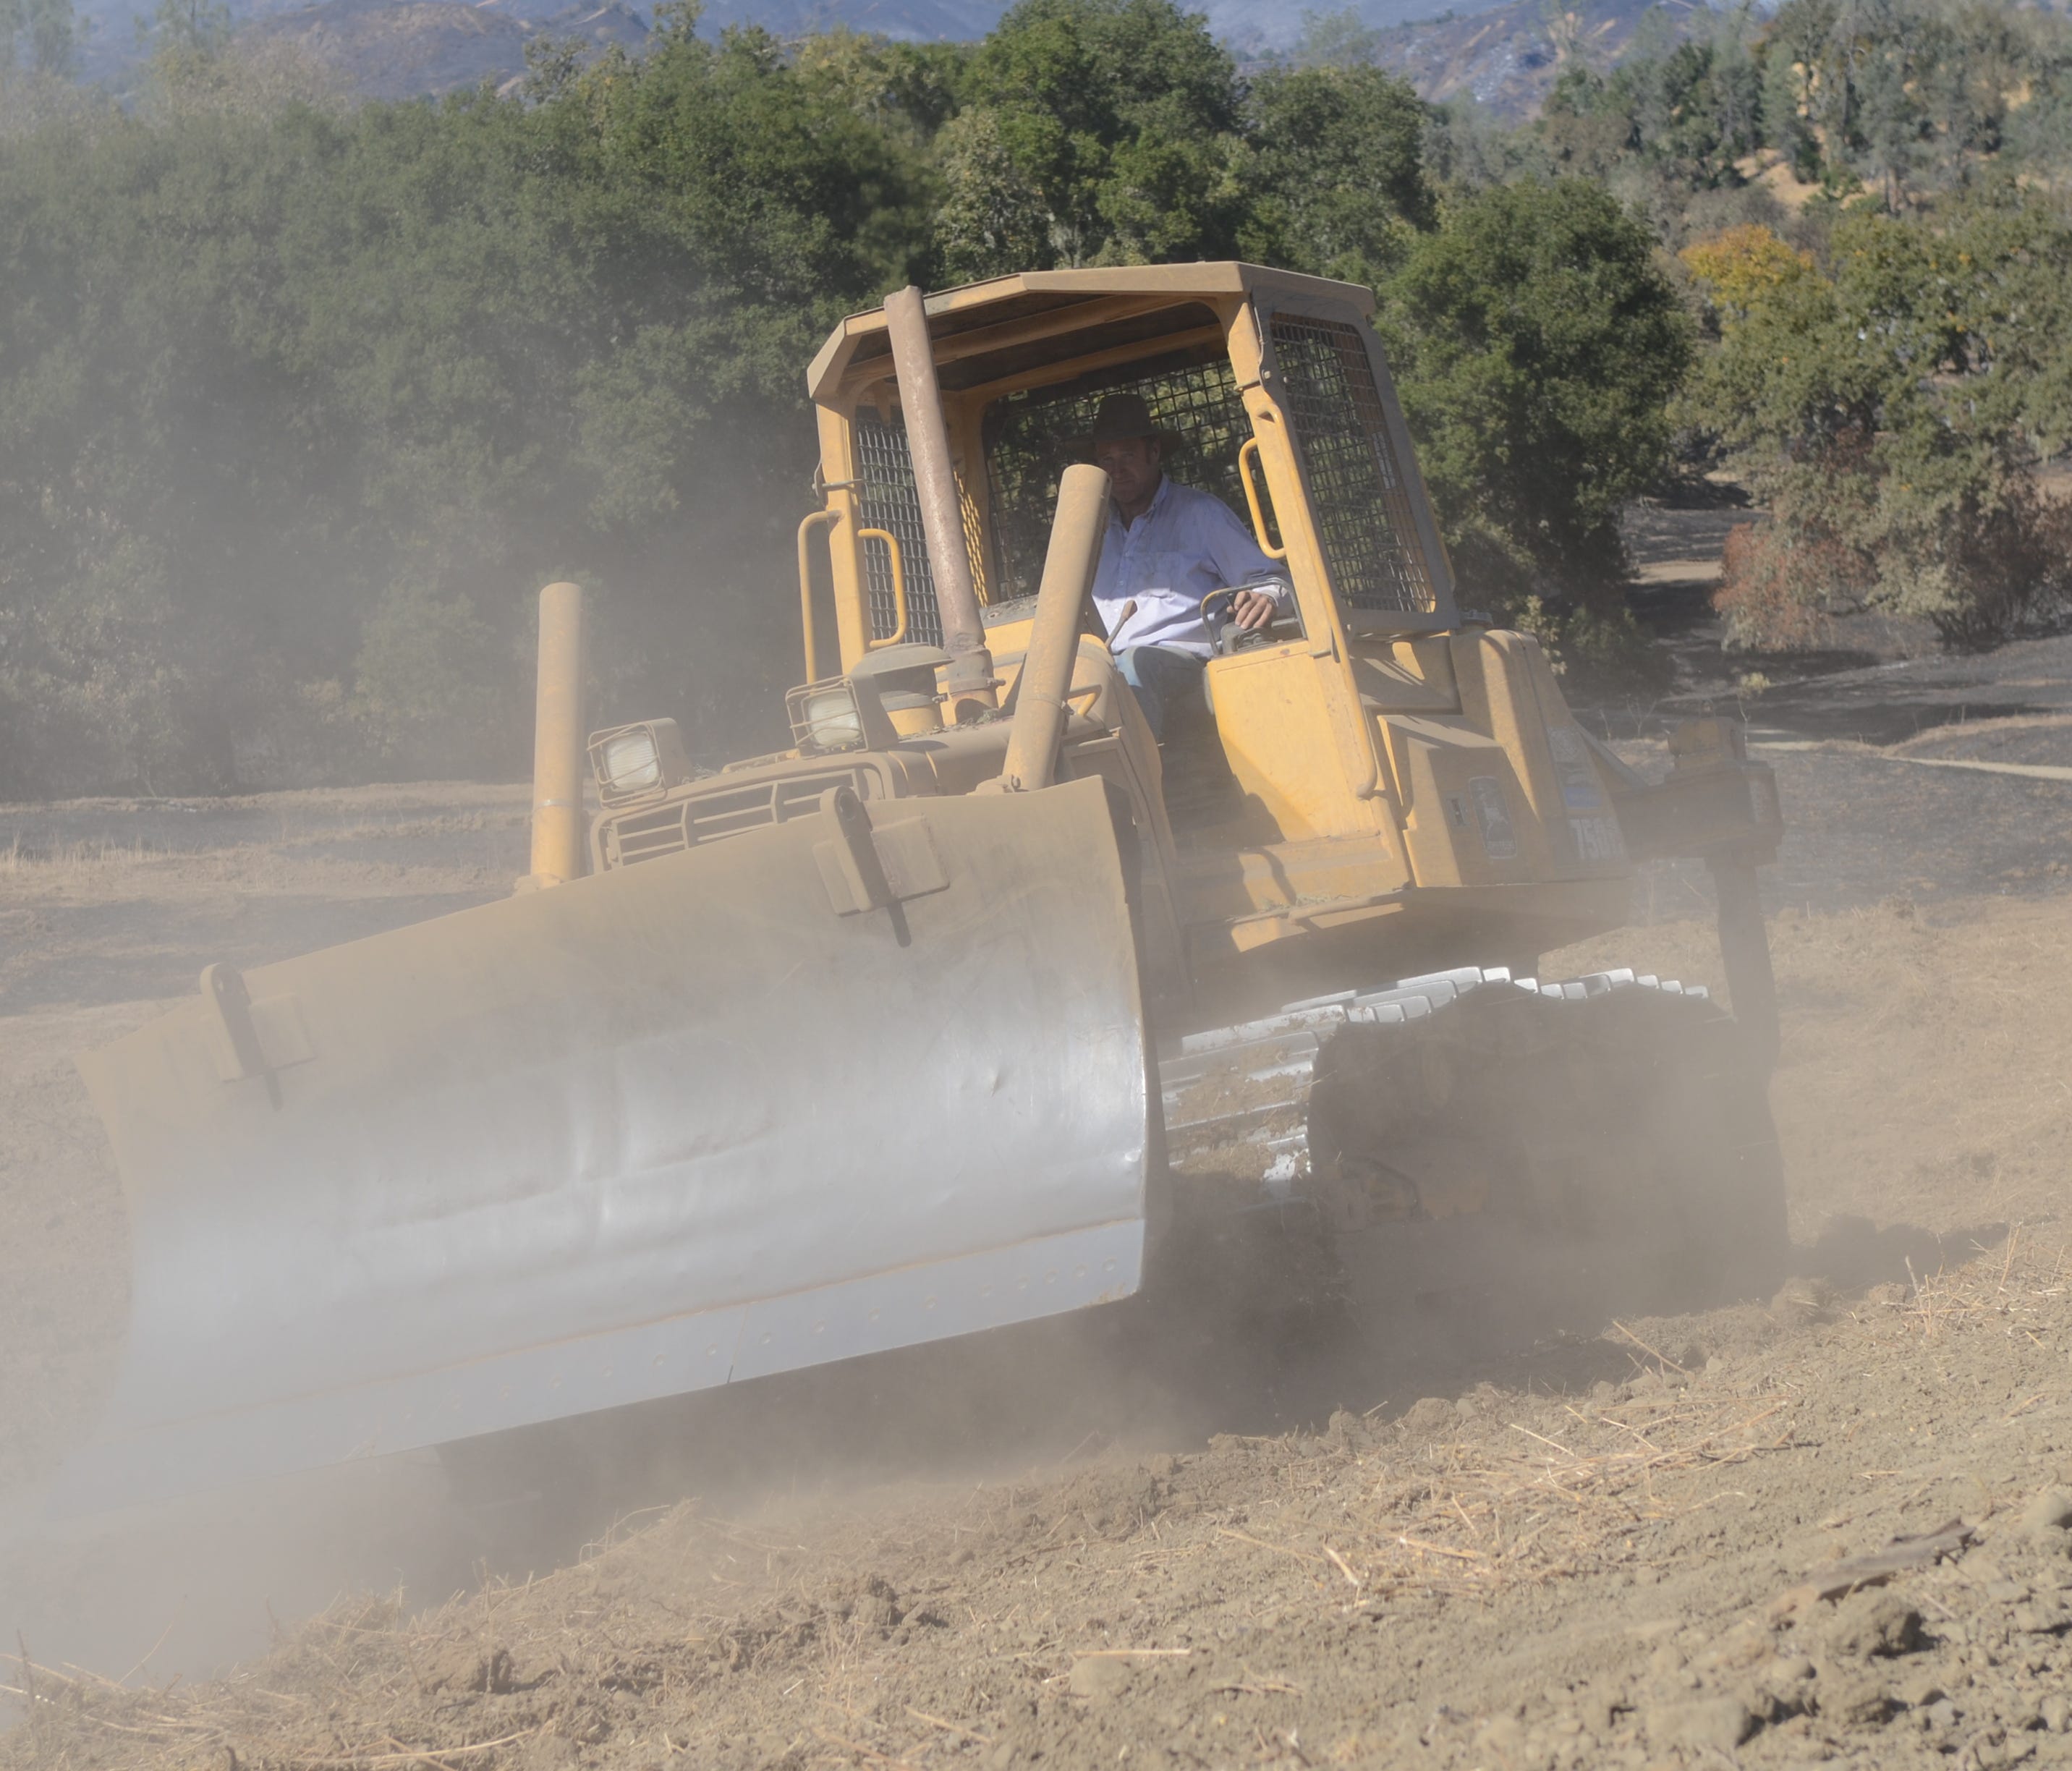 A resident of Capell Valley, Calif., runs a bulldozer in the hills above the valley floor.